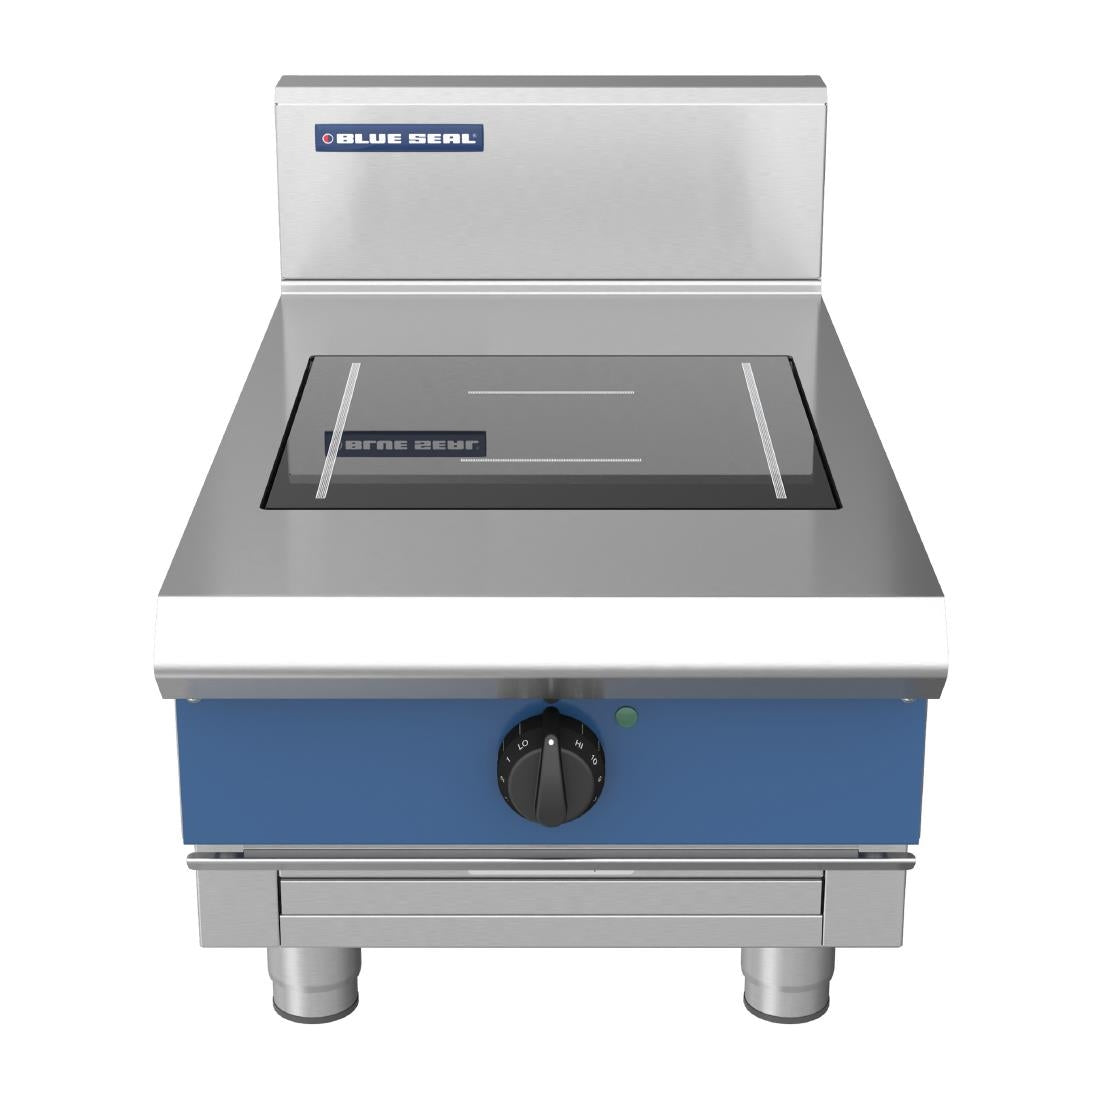 DX747 Blue Seal Single Zone Countertop Full Area Induction Hob 5kW IN511F-B JD Catering Equipment Solutions Ltd